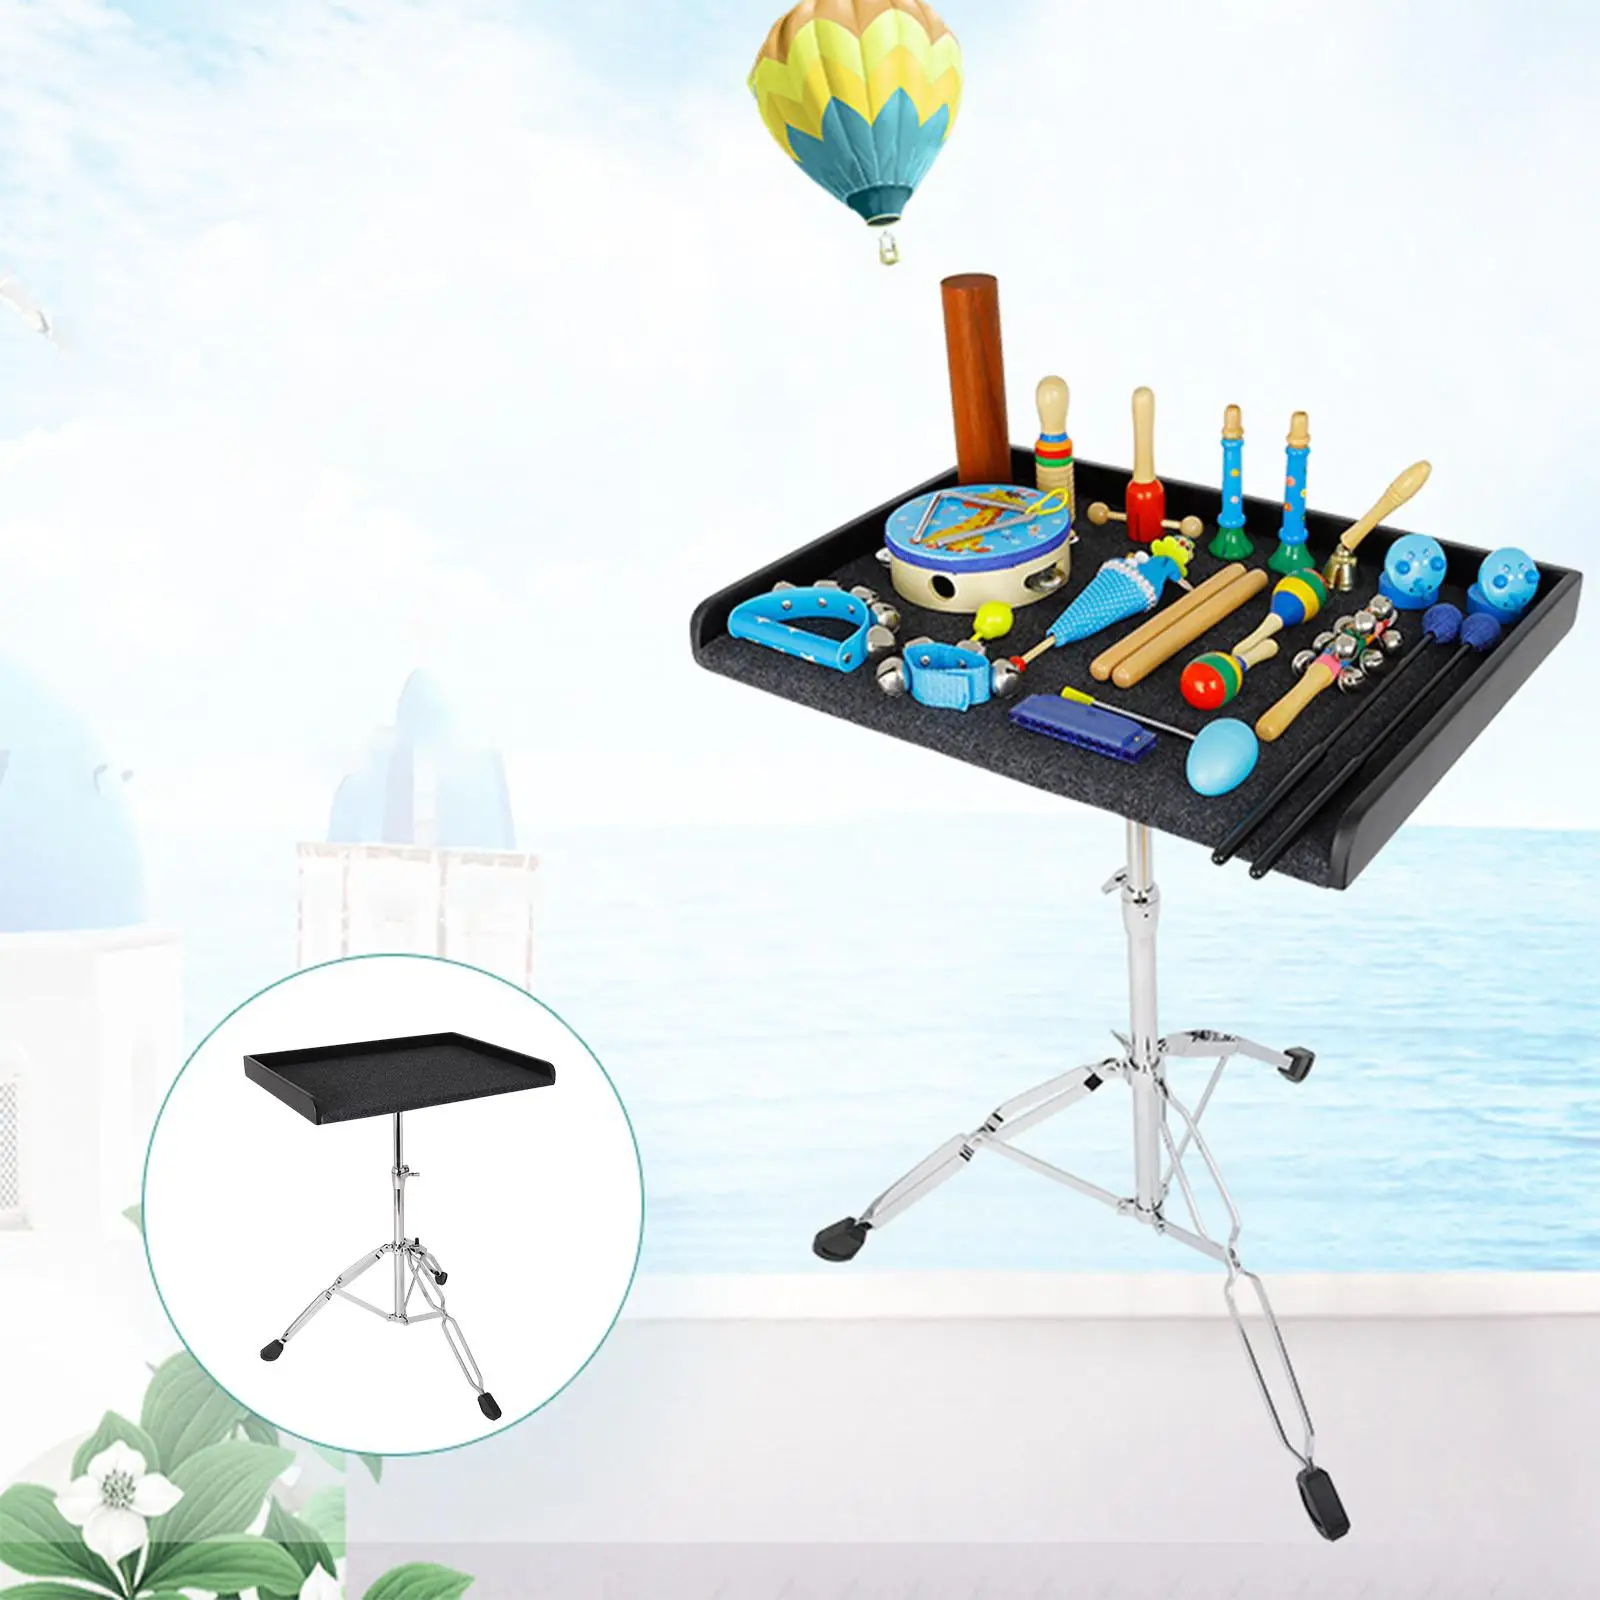 Percussion Table Mount Holder Drum Percussion Instrument Tray for Music